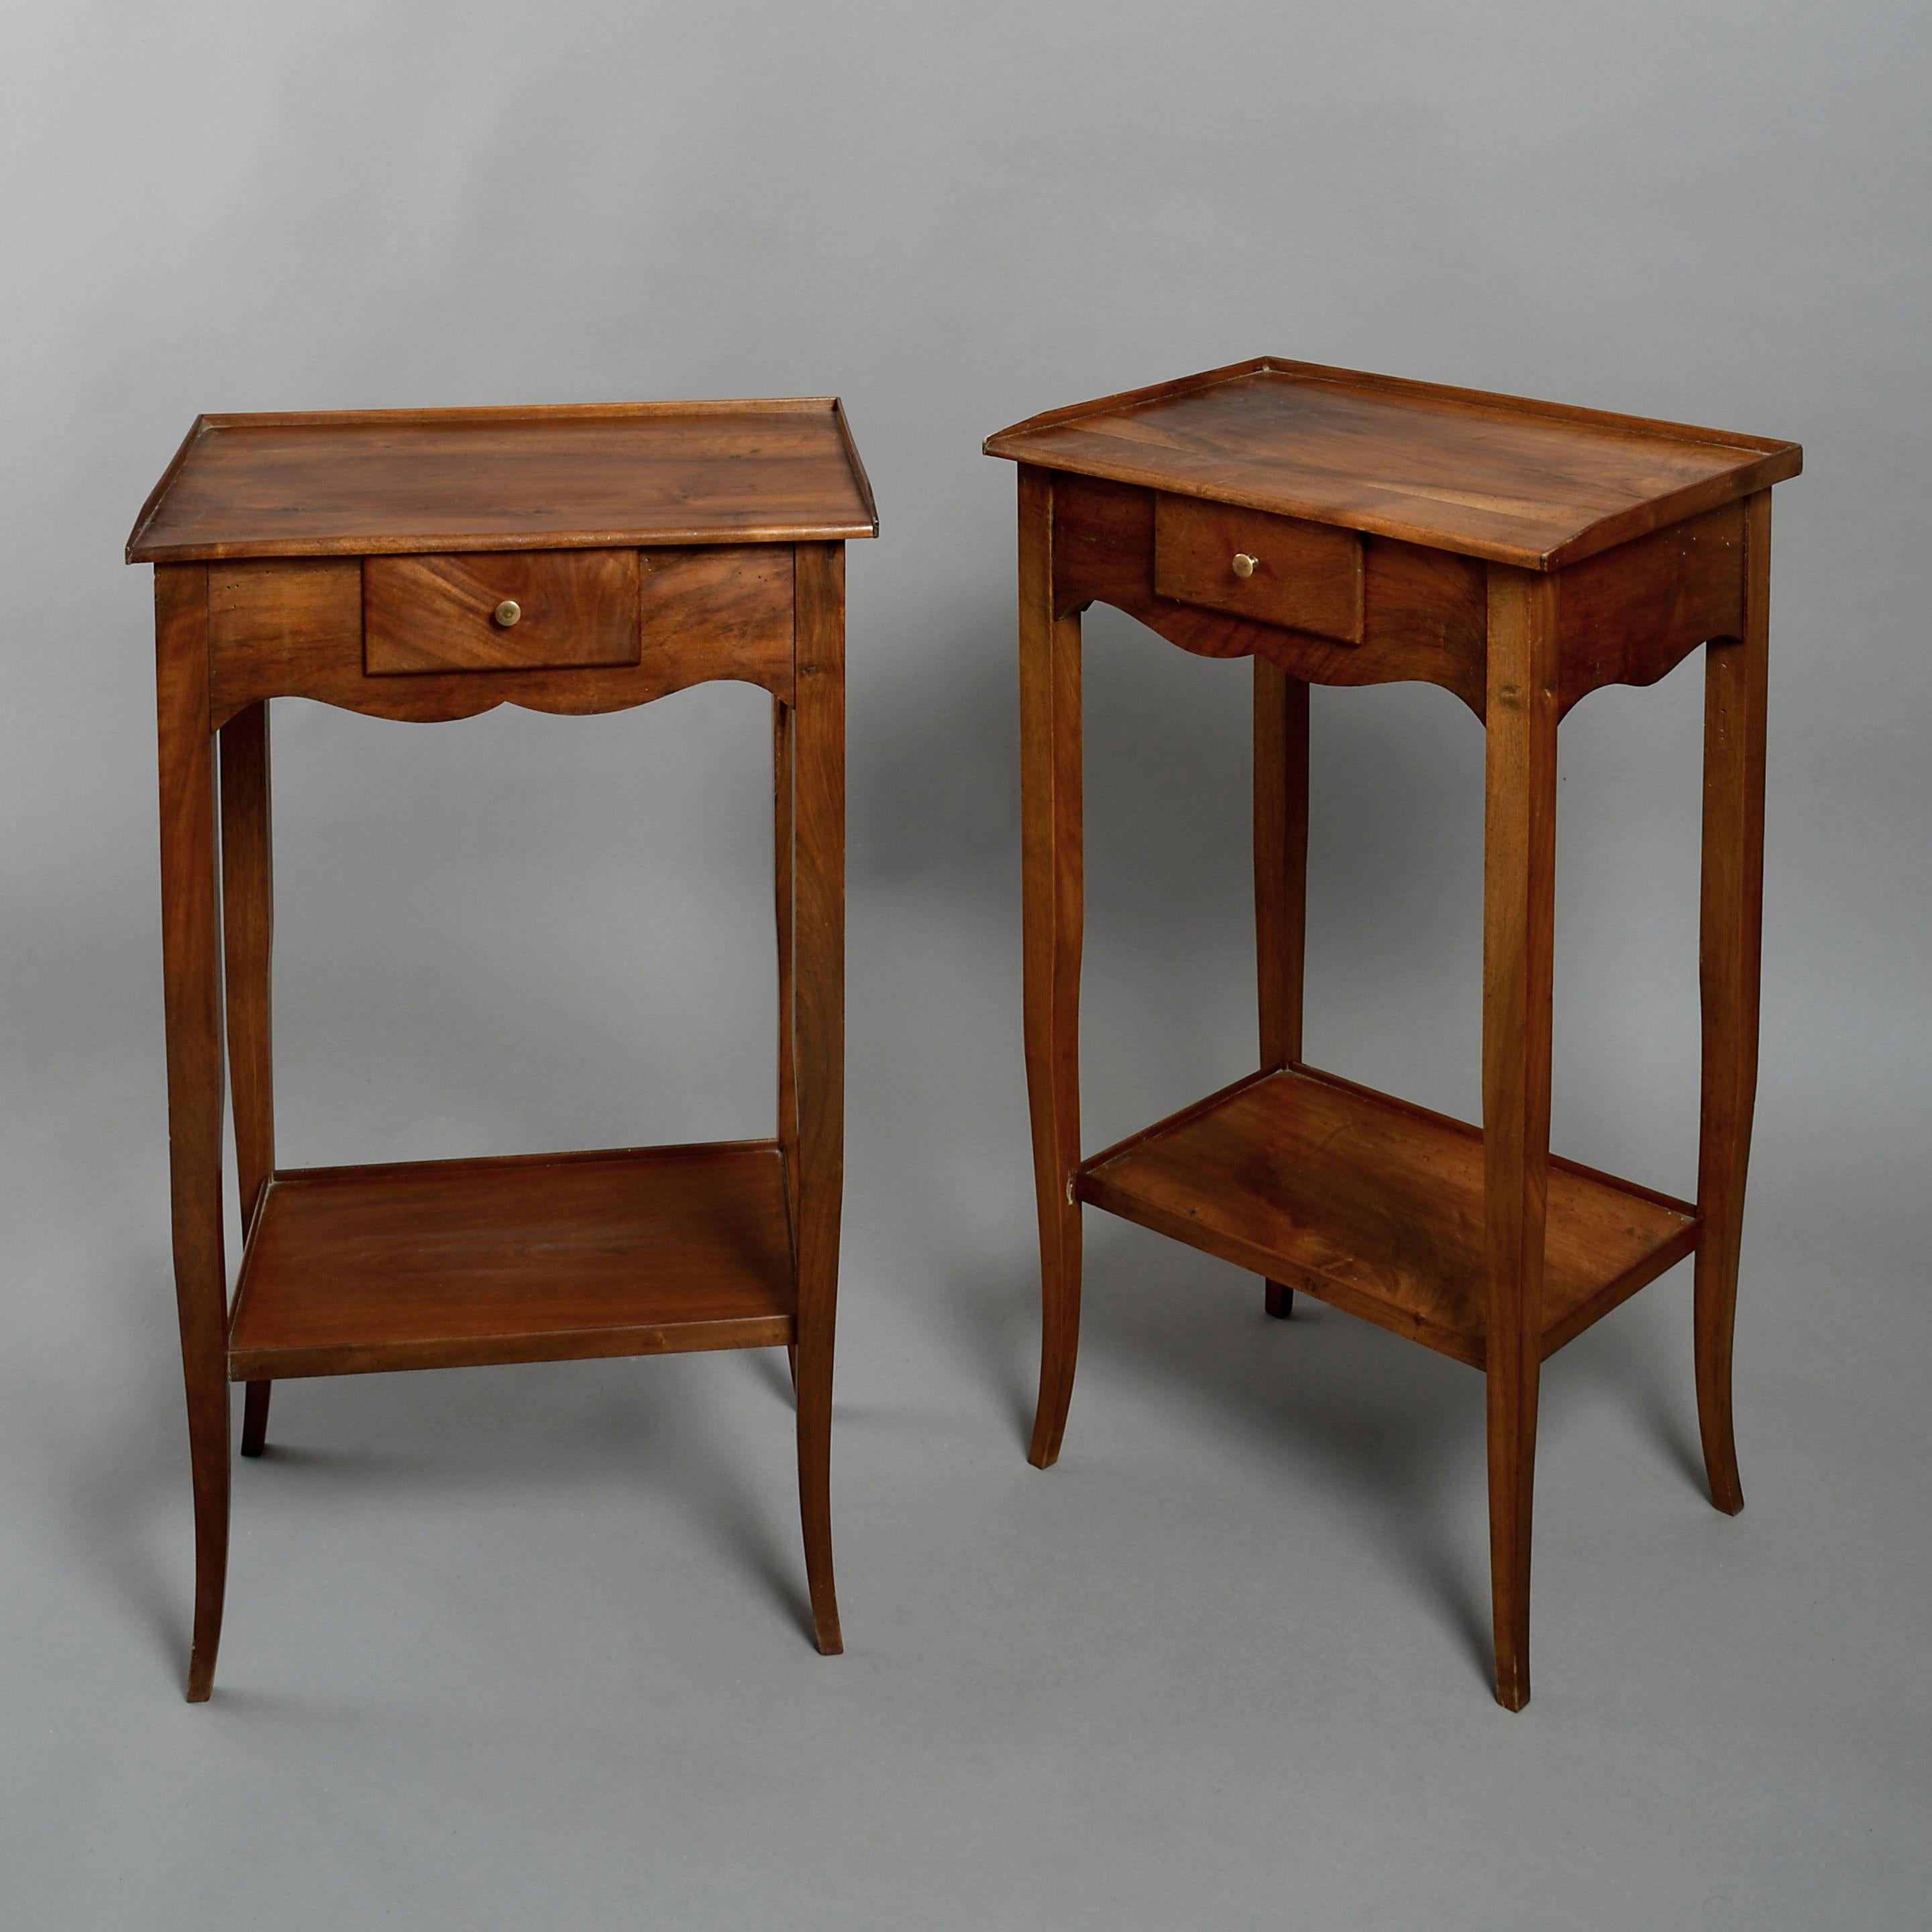 A pair of early 20th century walnut end tables or night stands in the Louis XV manner, each with a rectangular top set above a small central drawer within a shaped apron, all raised on square tapering legs and having a lower shelf.